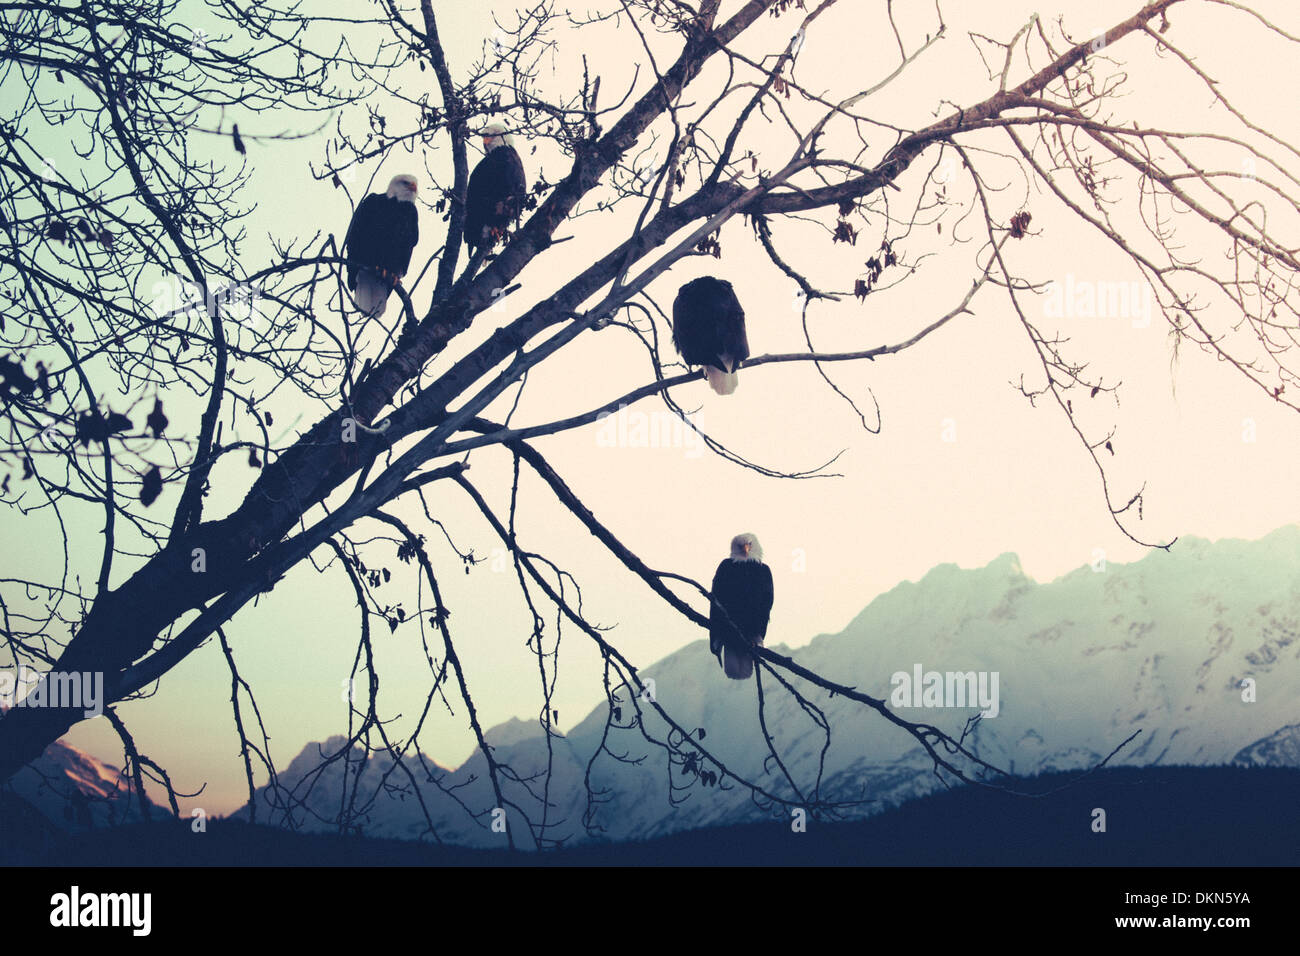 Bald eagles in a tree at sunset with Alaskan mountains in the background. Stock Photo